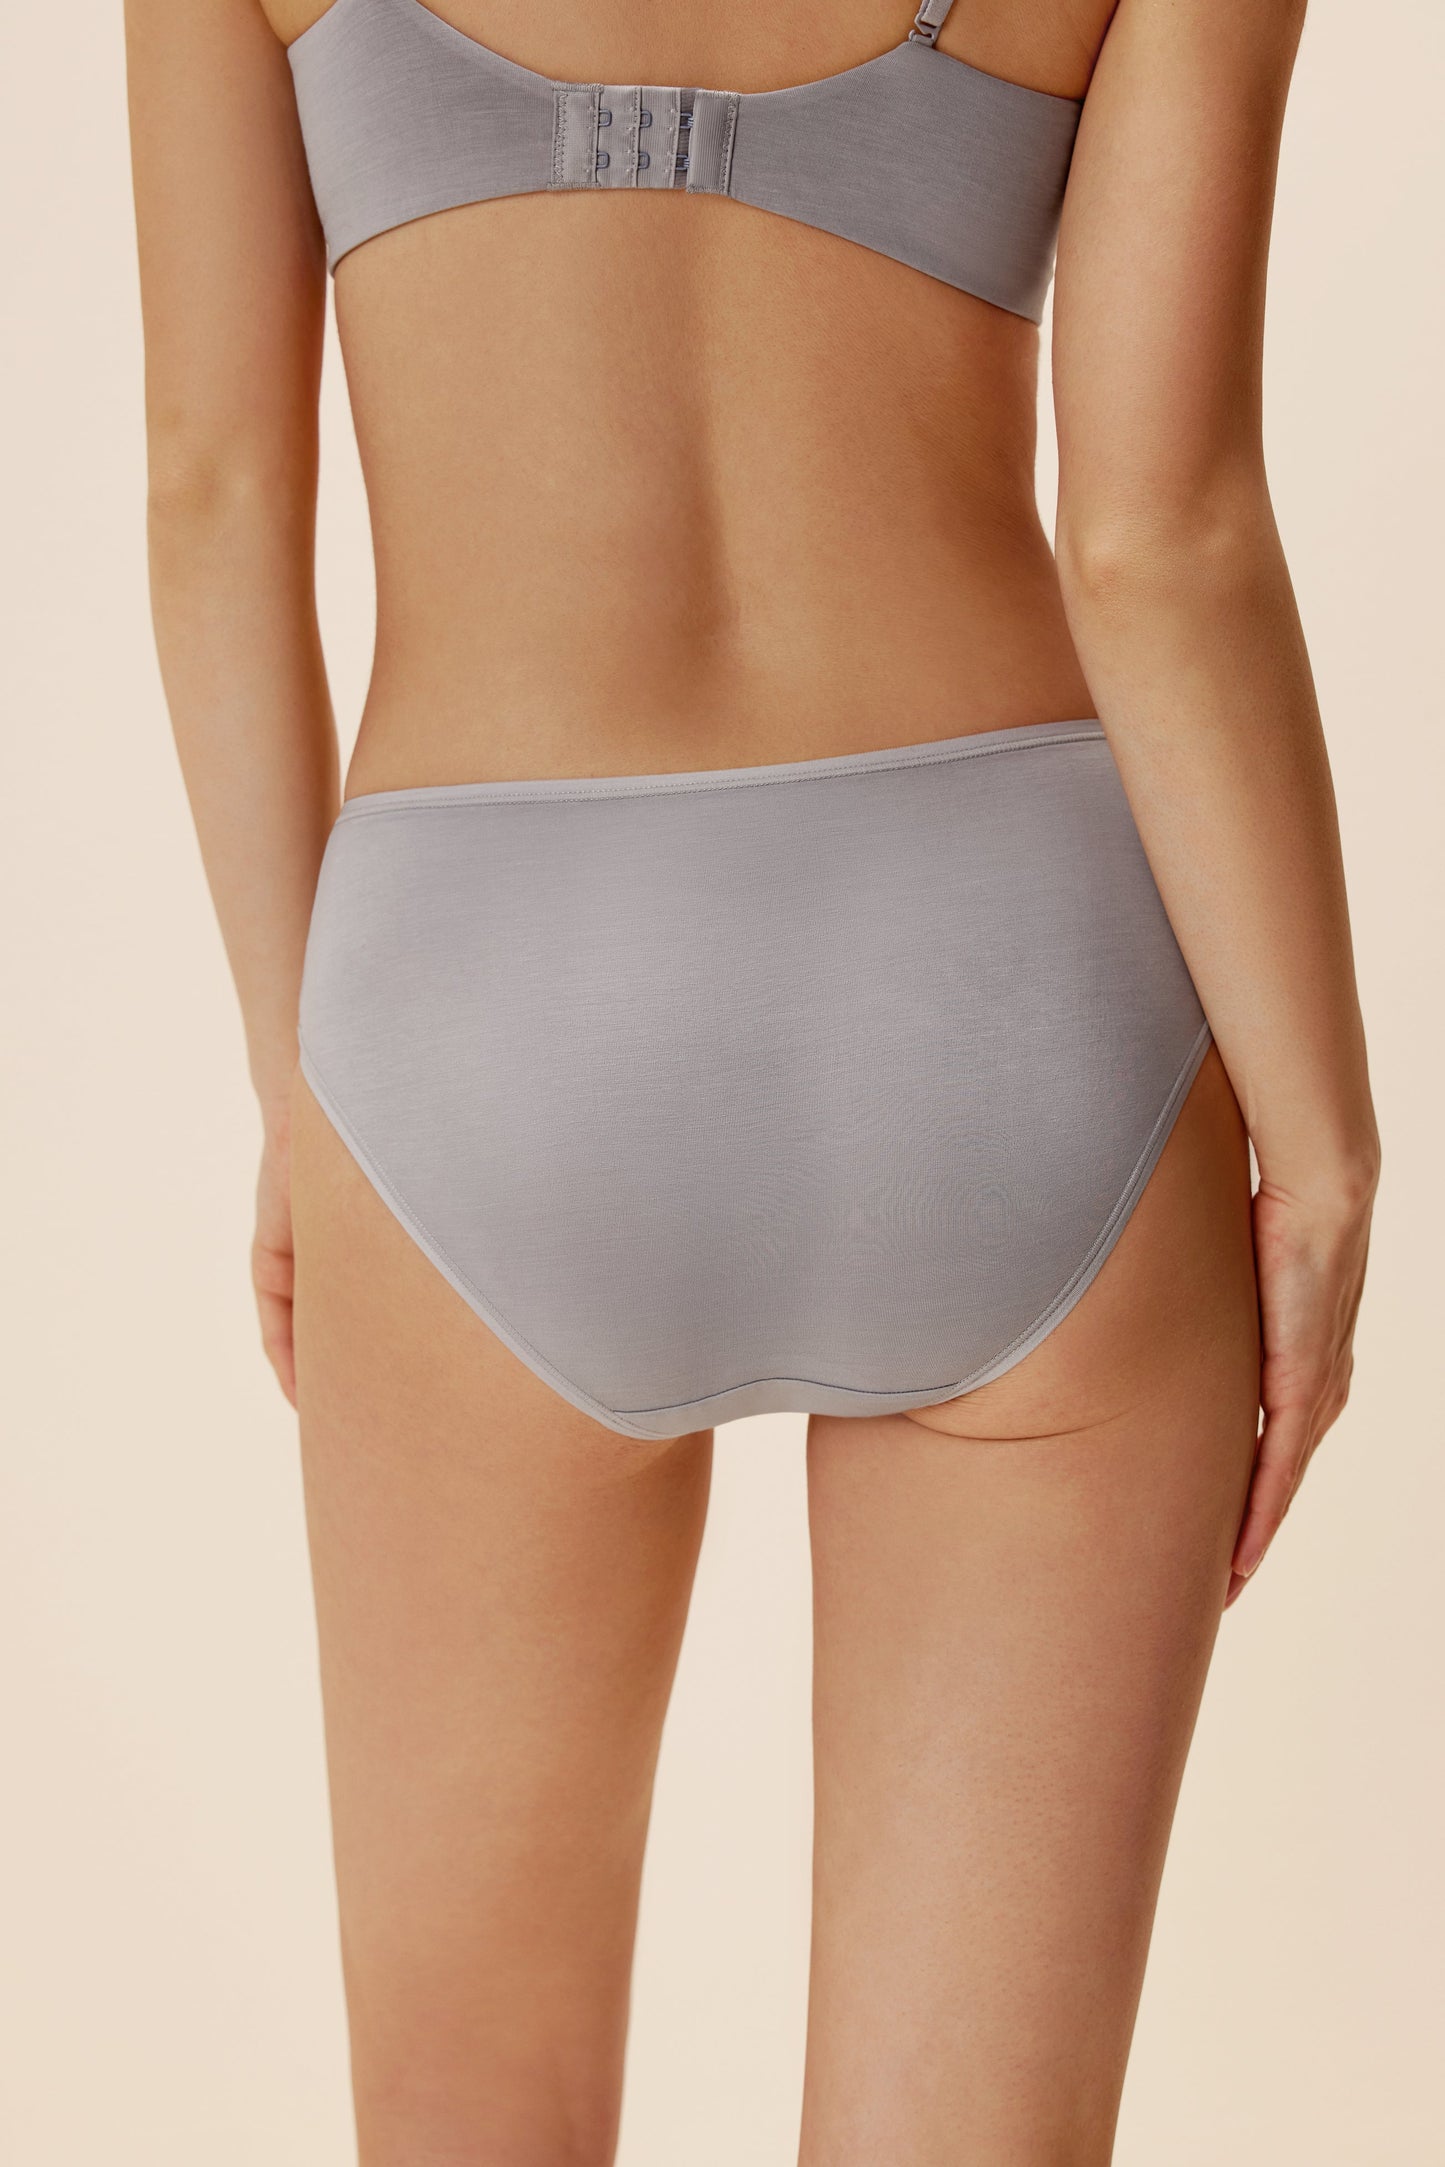 back of woman in lavender brief